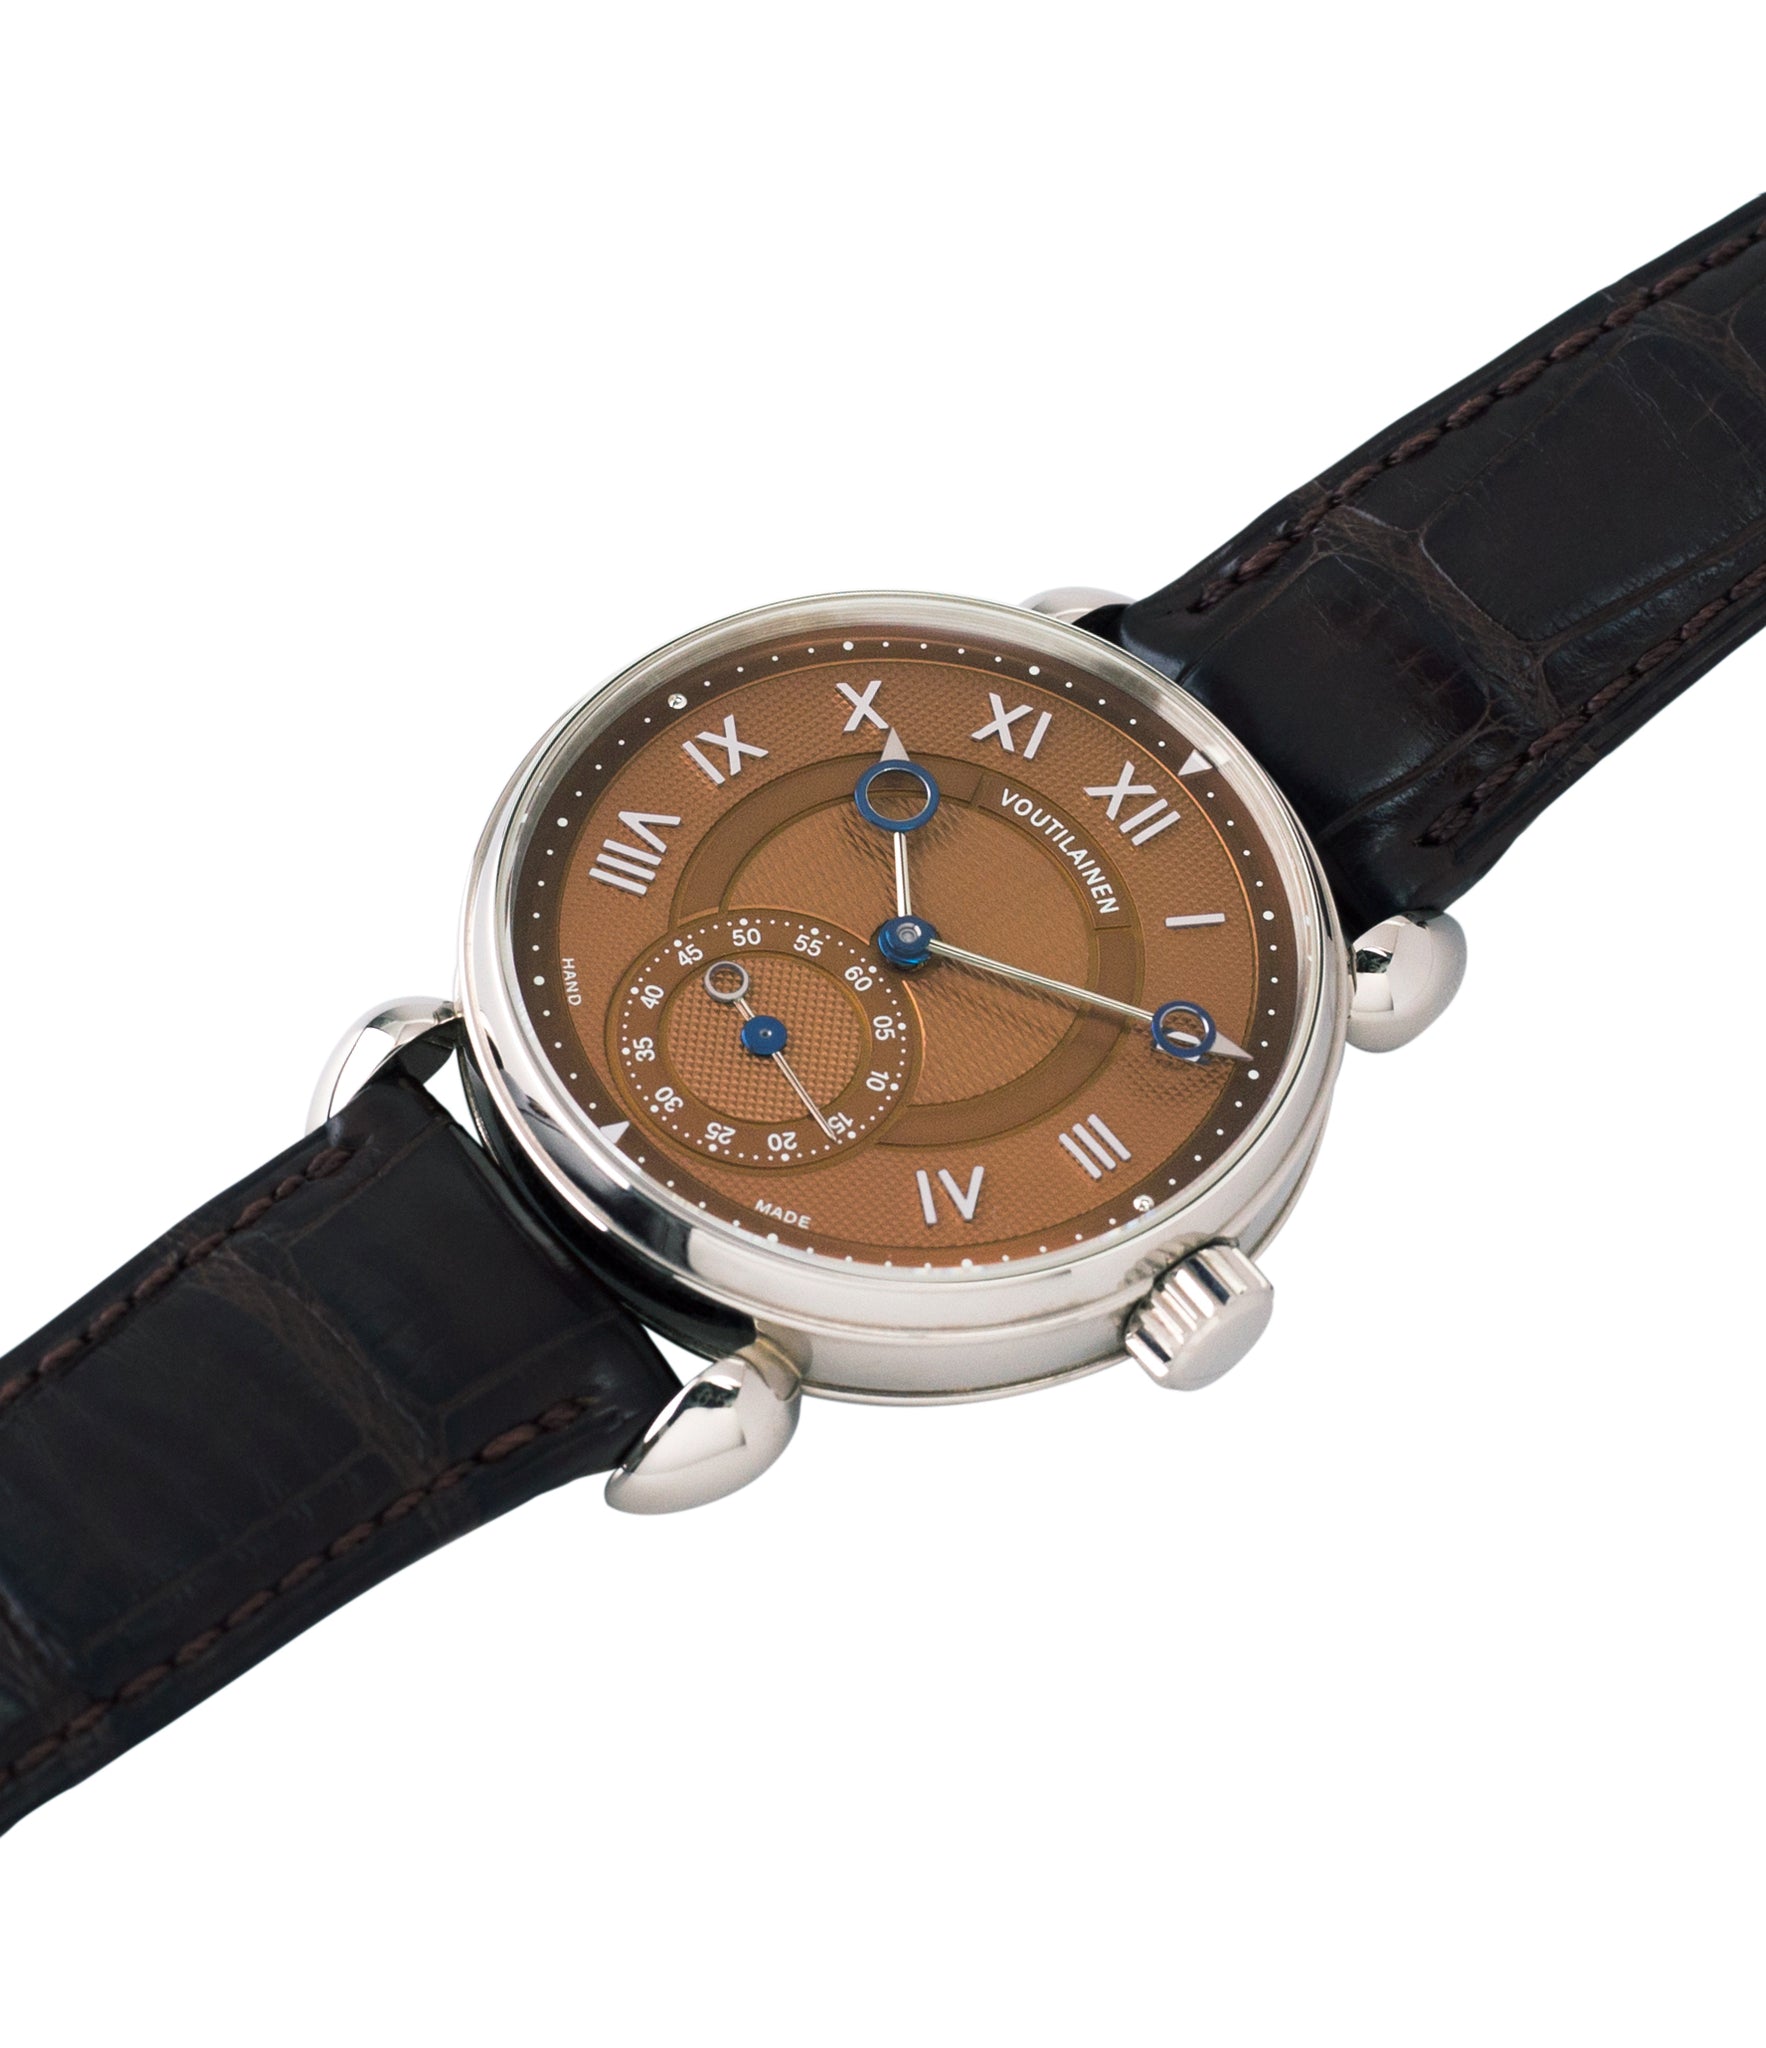 for sale Kari Voutilainen Observatoire Limited Edition rare brown dial watch online at A Collected Man London specialist endorsed seller of pre-owned independent watchmakers